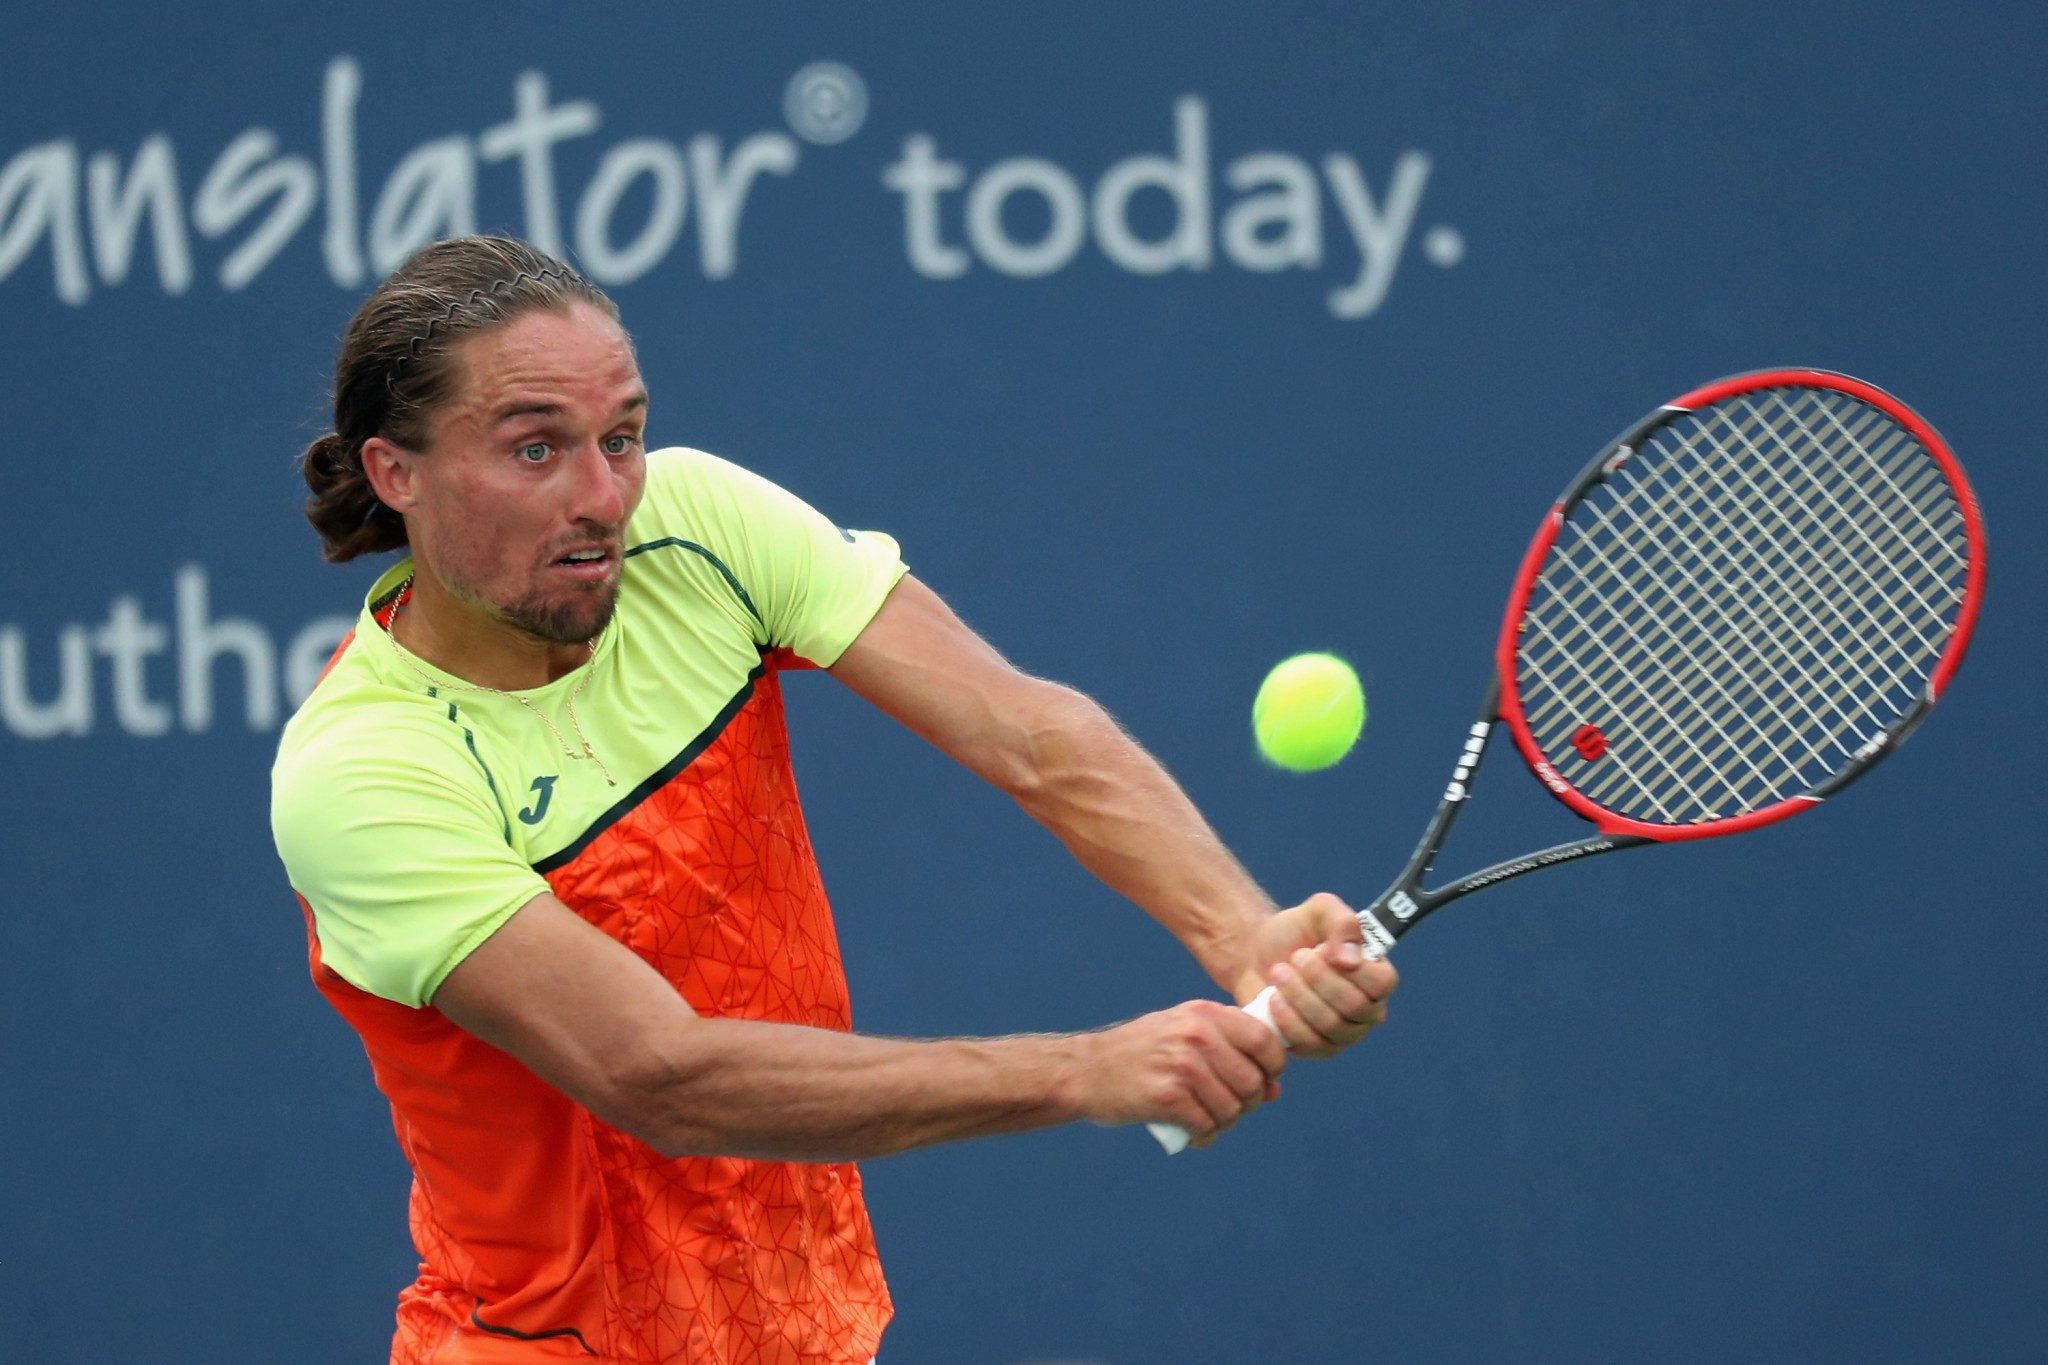 Tennis contest between Dolgopolov and Monteiro subject to match-fixing investigation